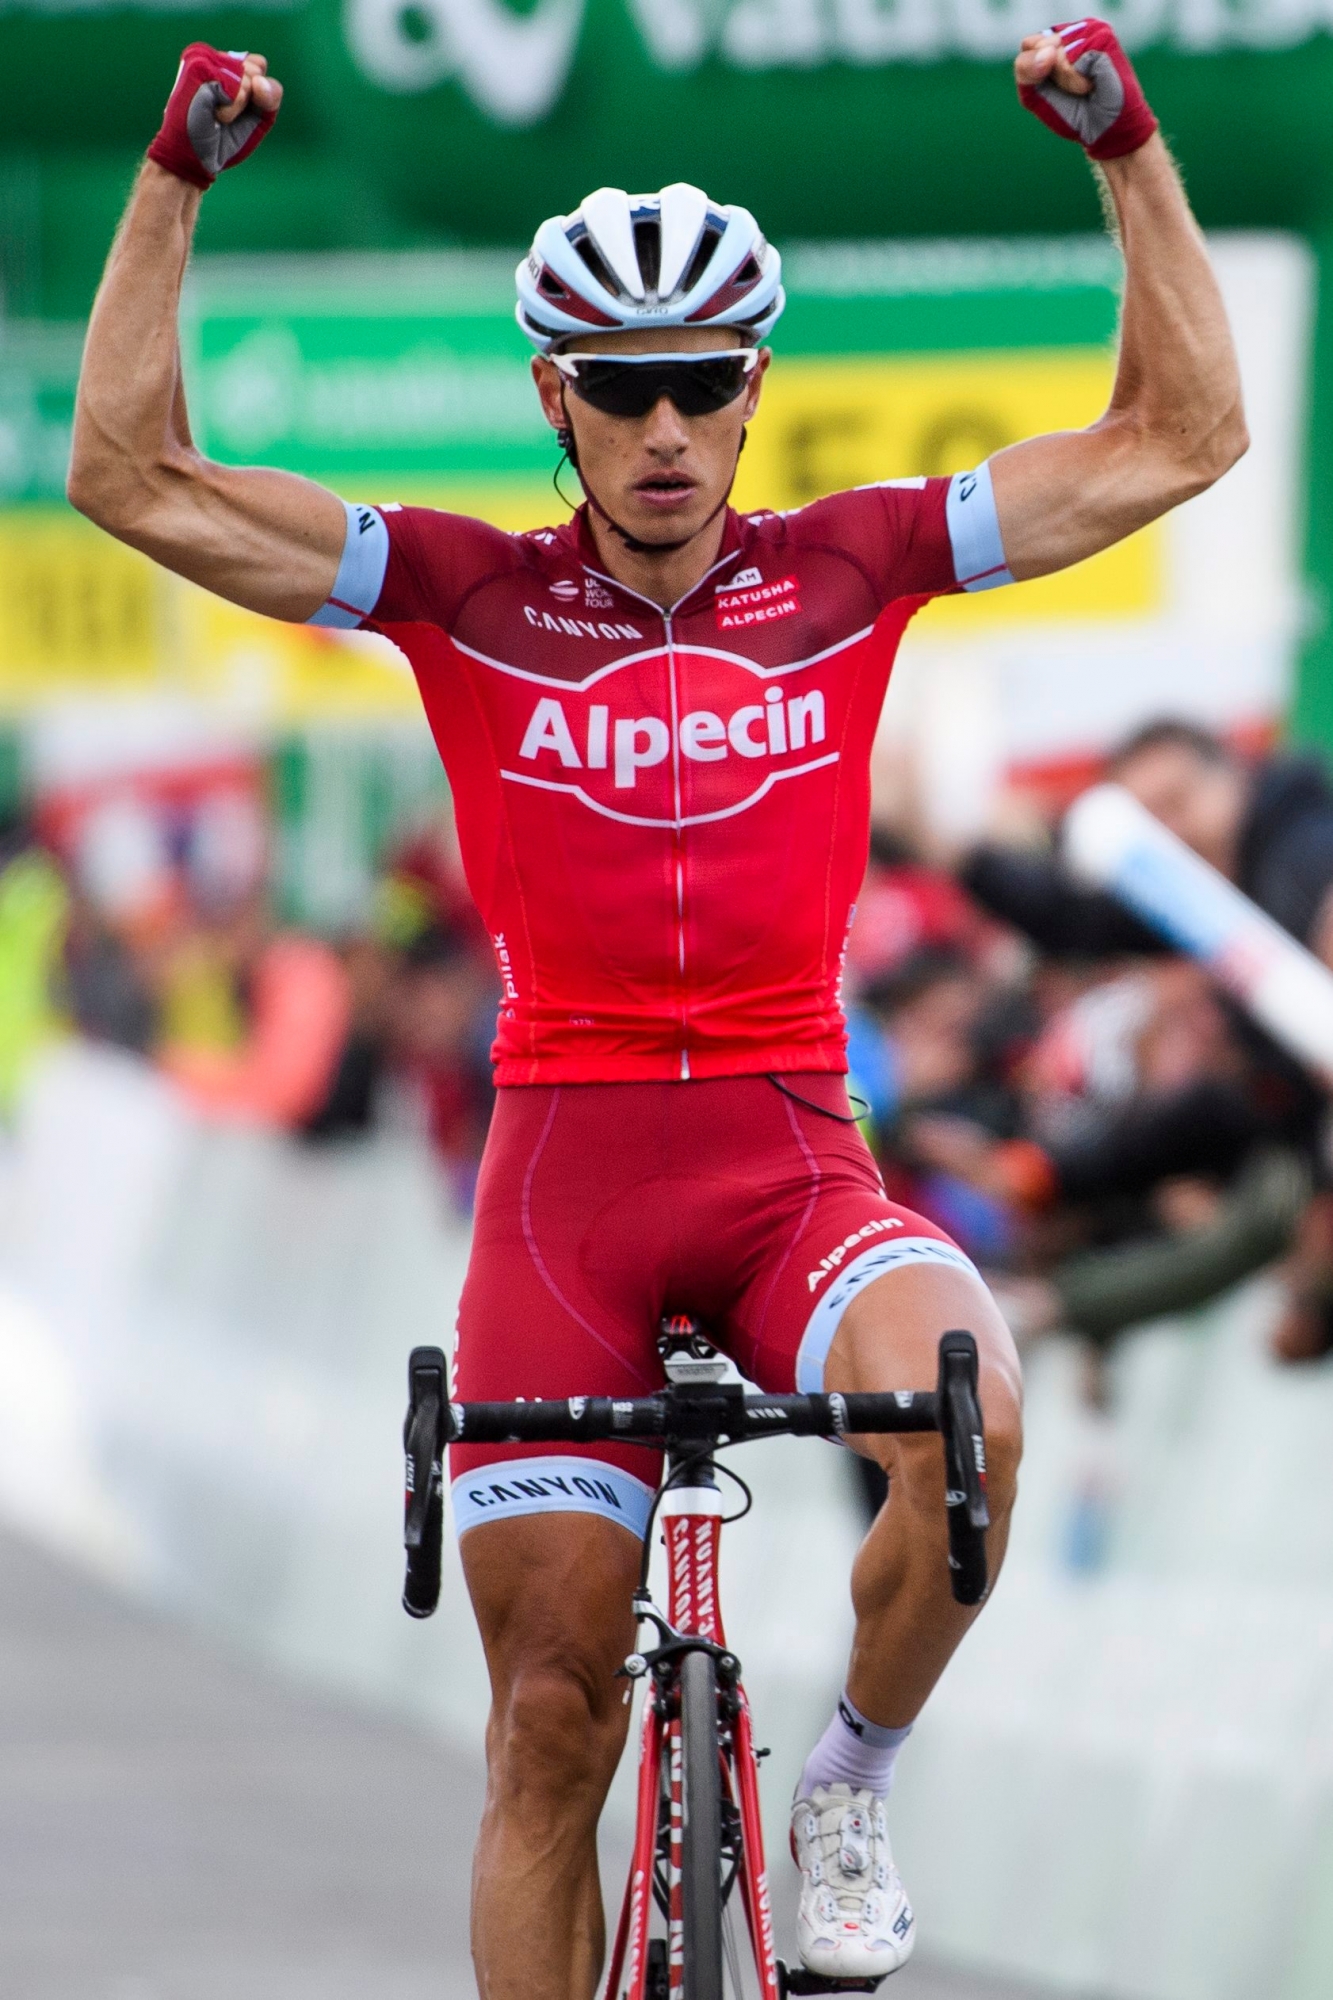 Simon Spilak from Slovenia of Team Katusha Alpecin reacts after winning the 7th stage, a 160,8 km race from Zernez, Switzerland, to Soelden, Austria, at the 81st Tour de Suisse UCI ProTour cycling race, on Friday, June 16, 2017. (KEYSTONE/Gian Ehrenzeller) SWITZERLAND CYCLING TOUR DE SUISSE 2017